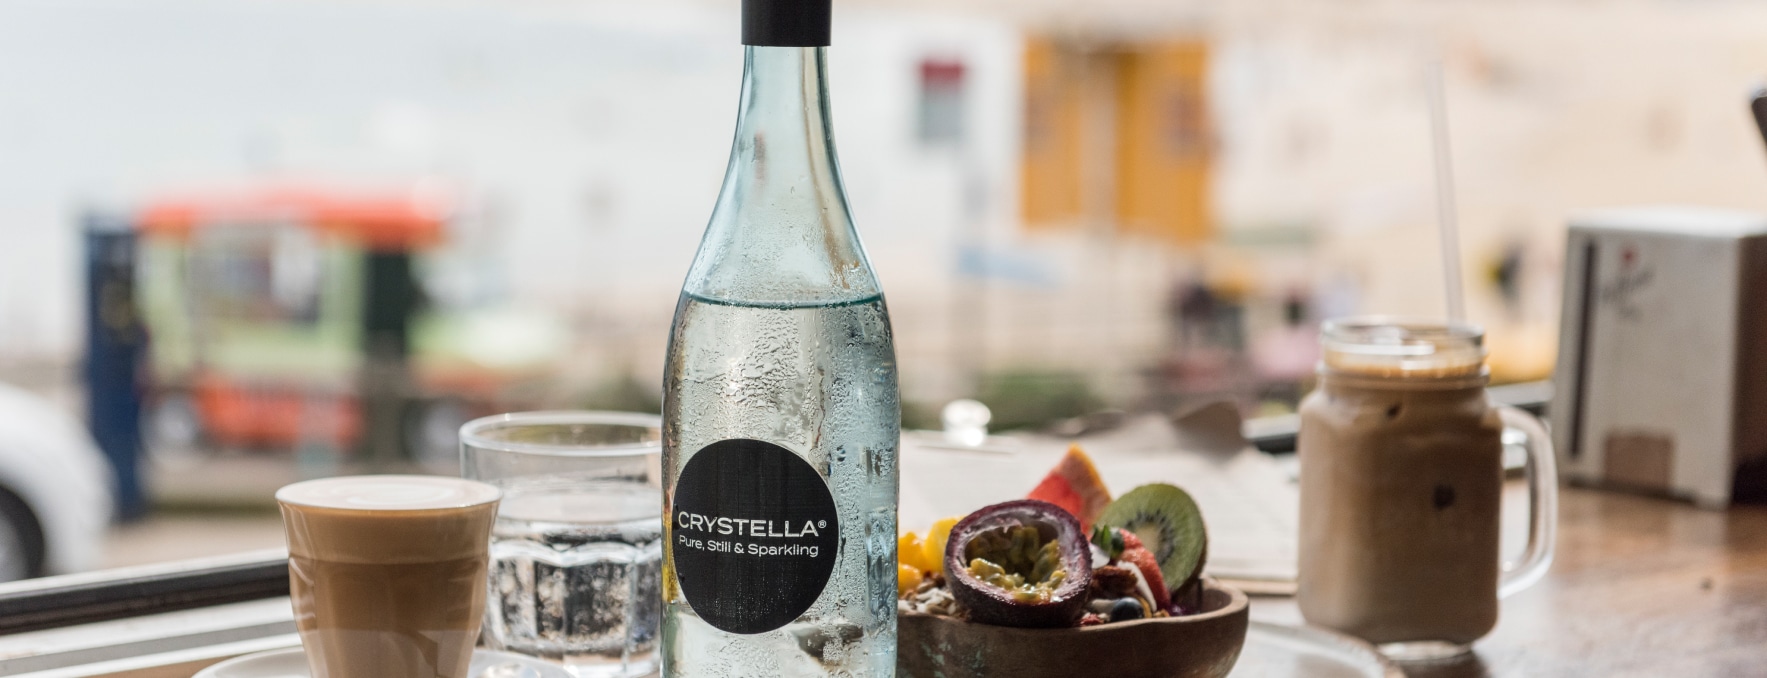 A Bottle of Crystella Pure, Still & Sparkling on Top of the Table